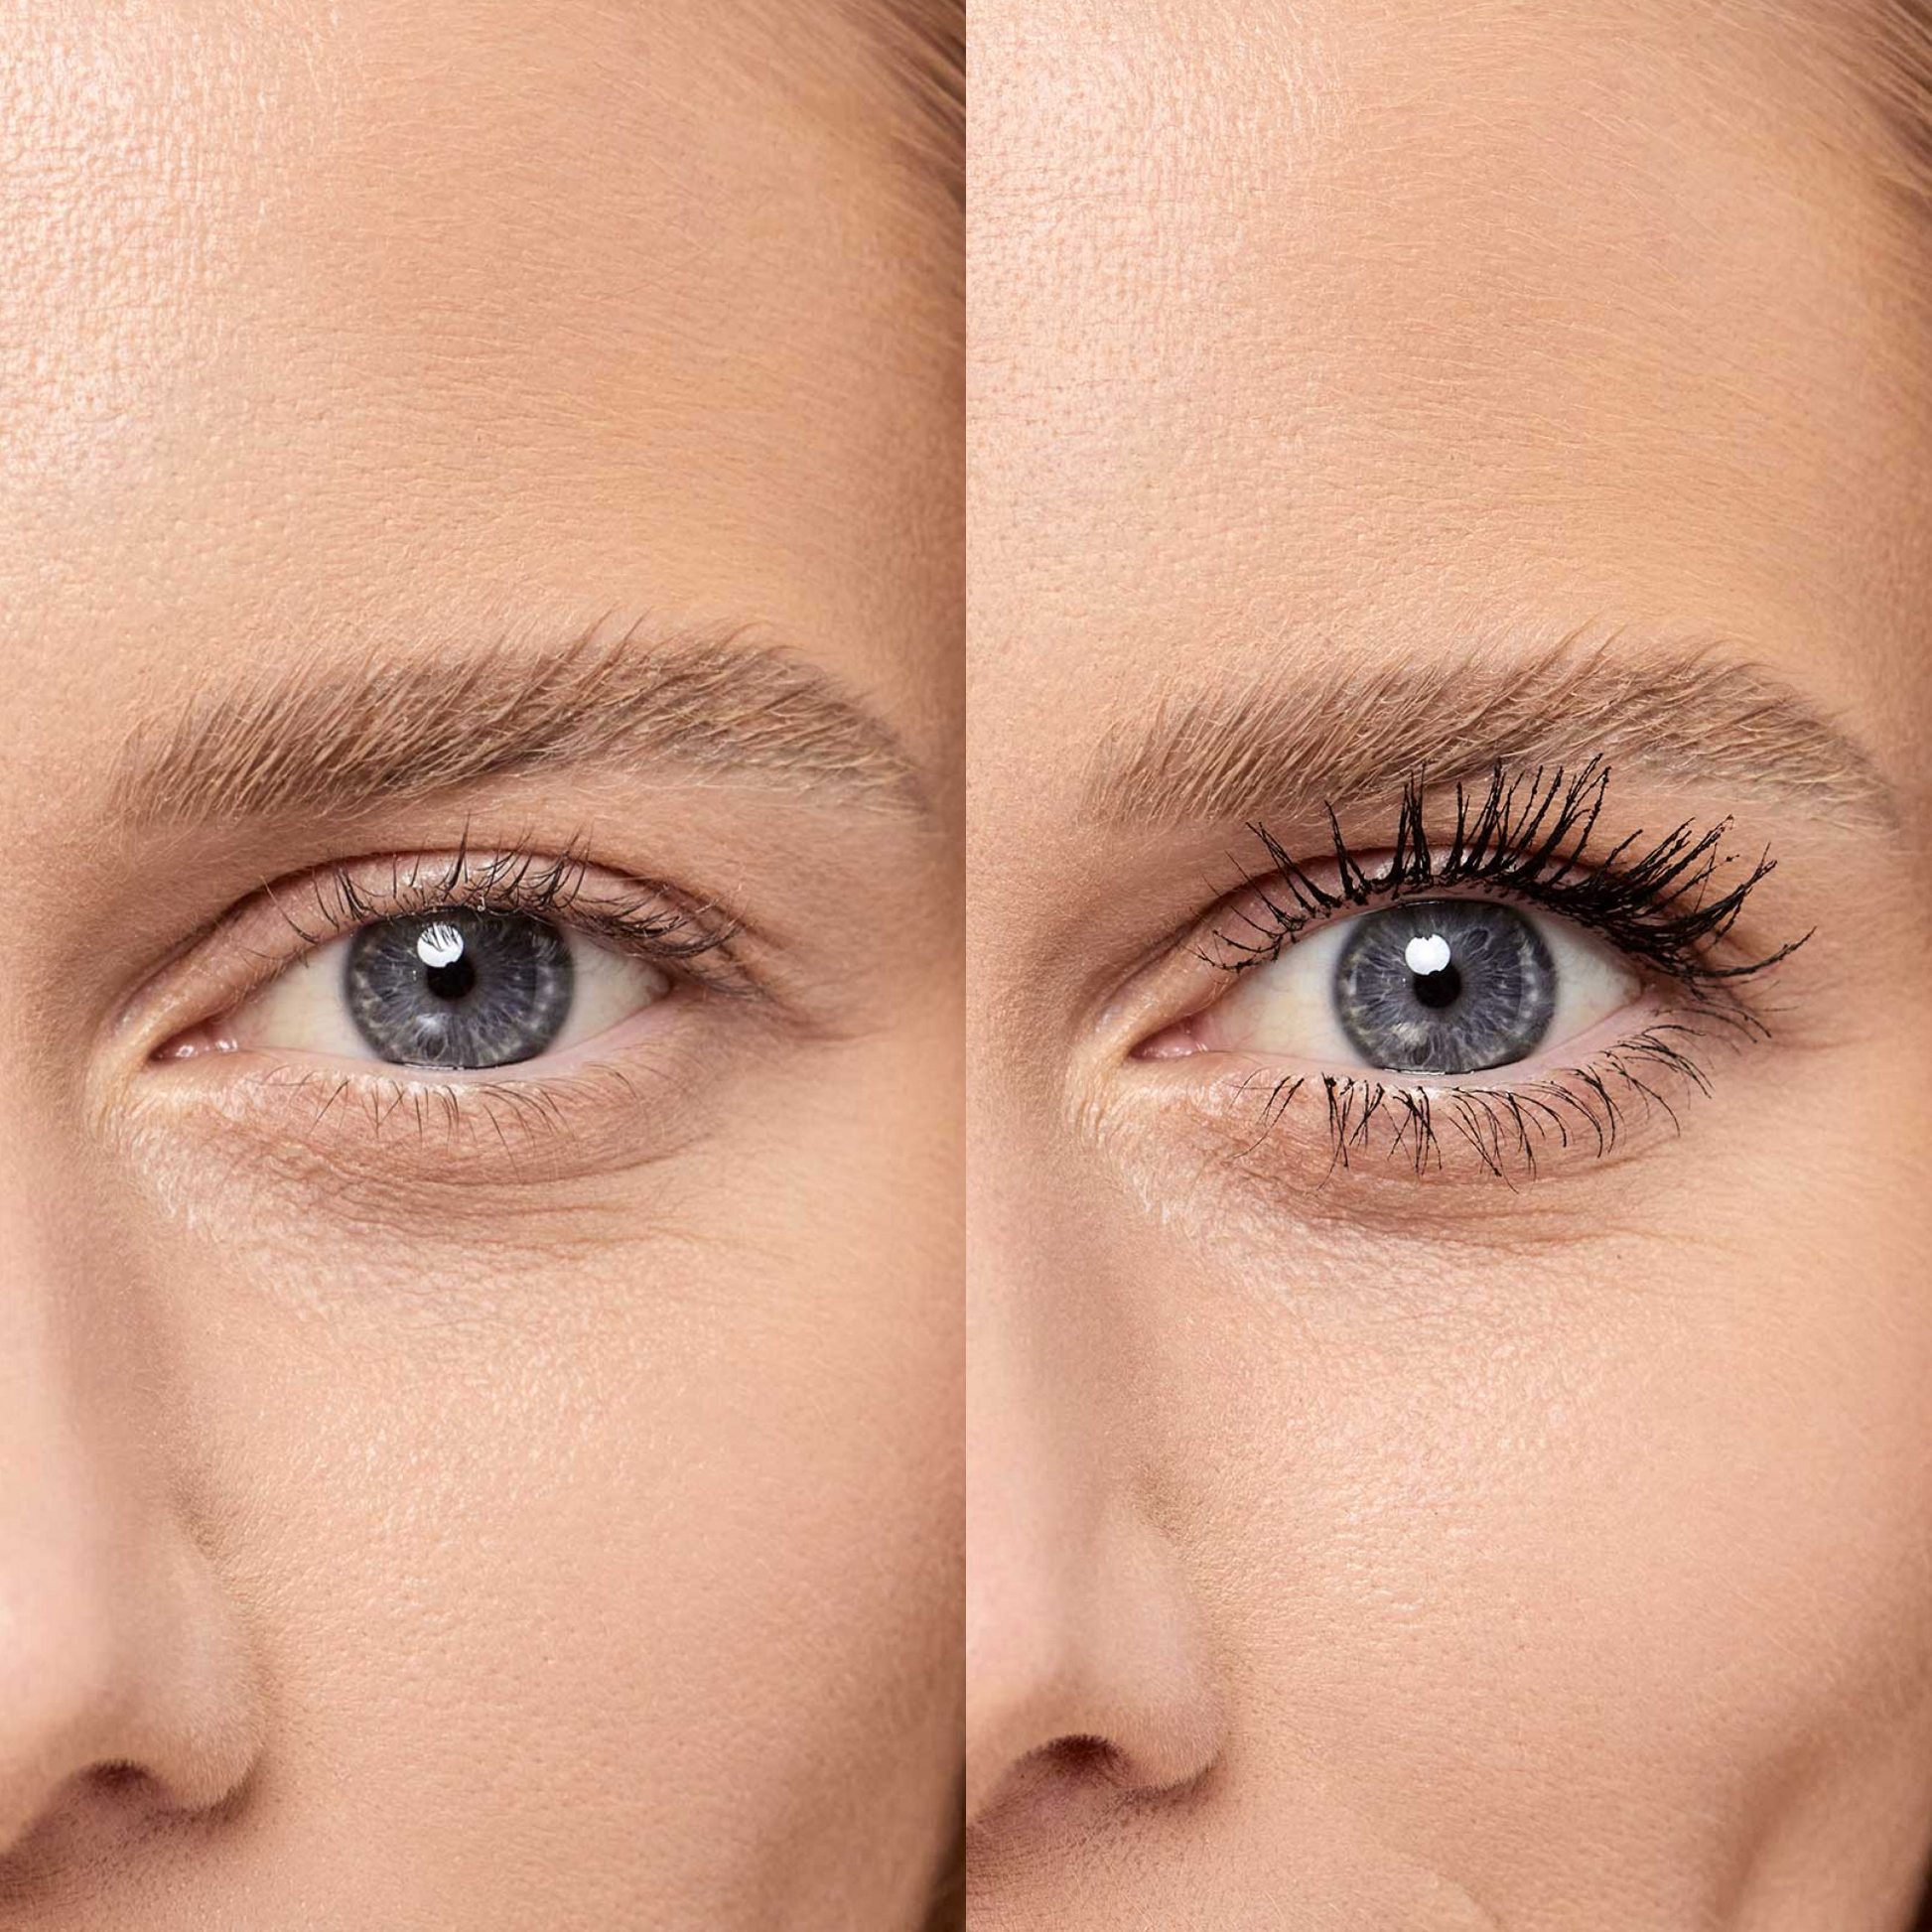 [Shared: A close up of a model's eyelashes before and after applying the Tower 28 Beauty's MakeWaves Mascara in Jet. Lashes are visibly lifted and lengthened